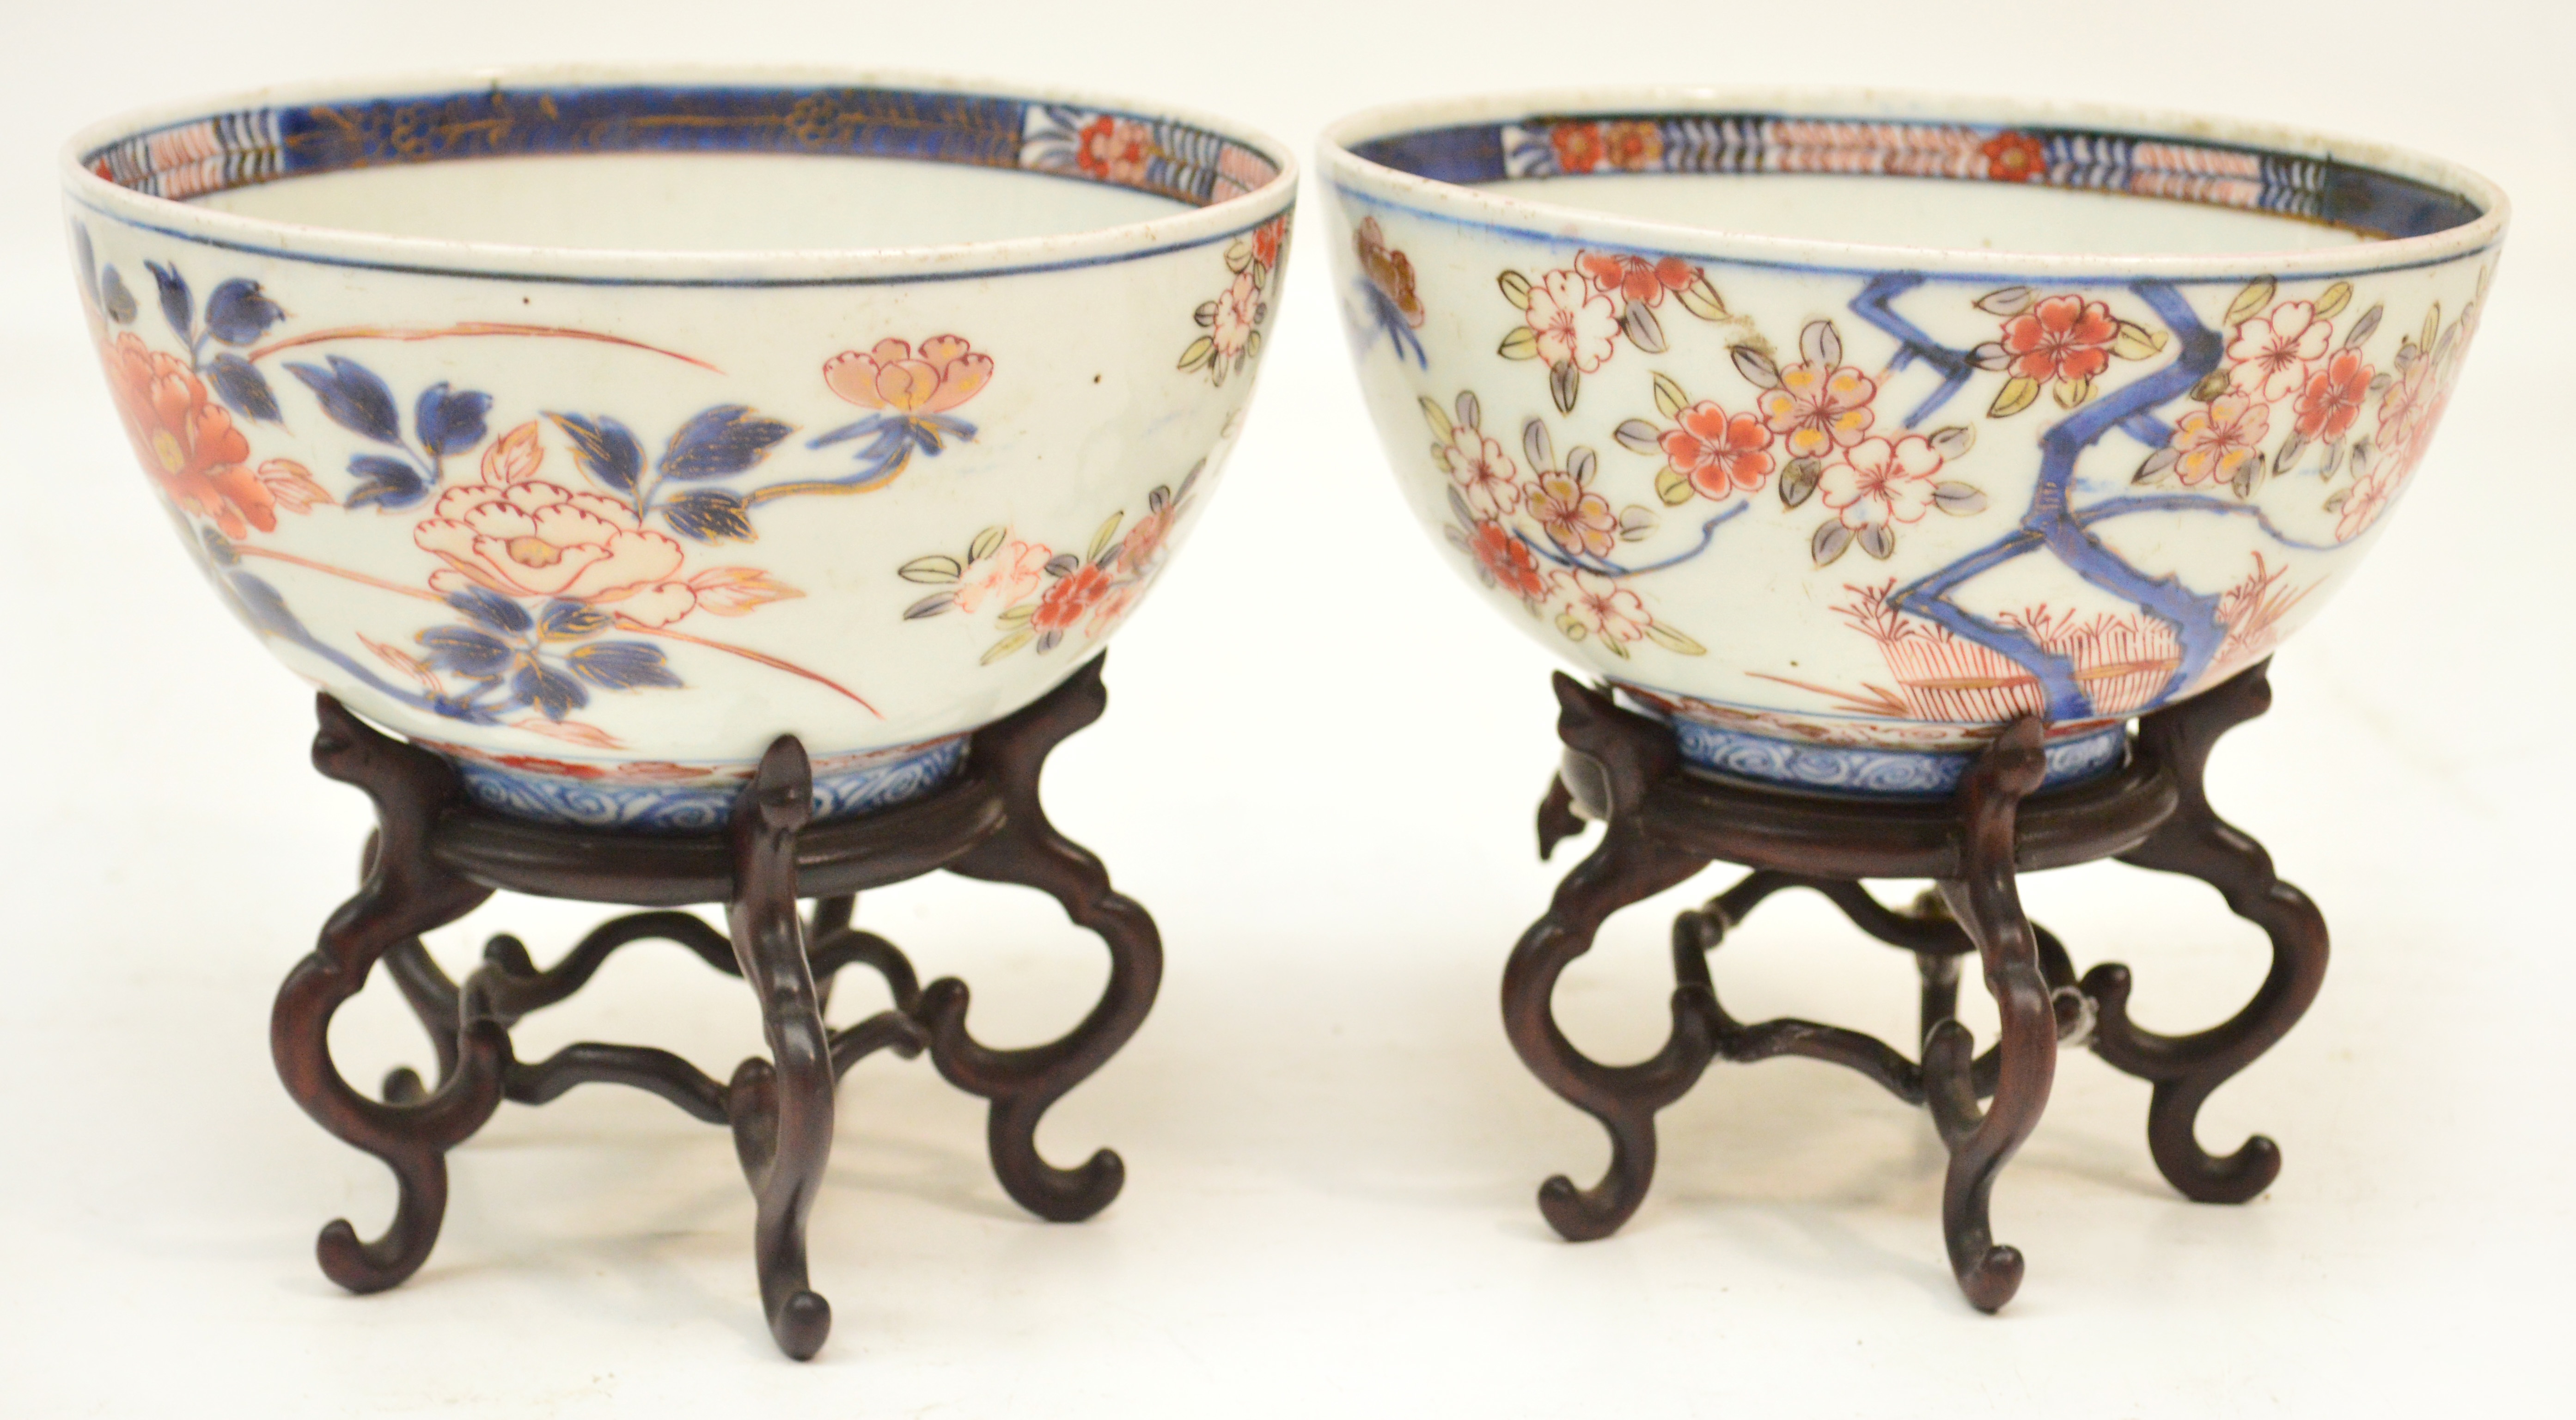 A pair of 18th century Chinese porcelain Imari decorated bowls painted in underglaze blue and